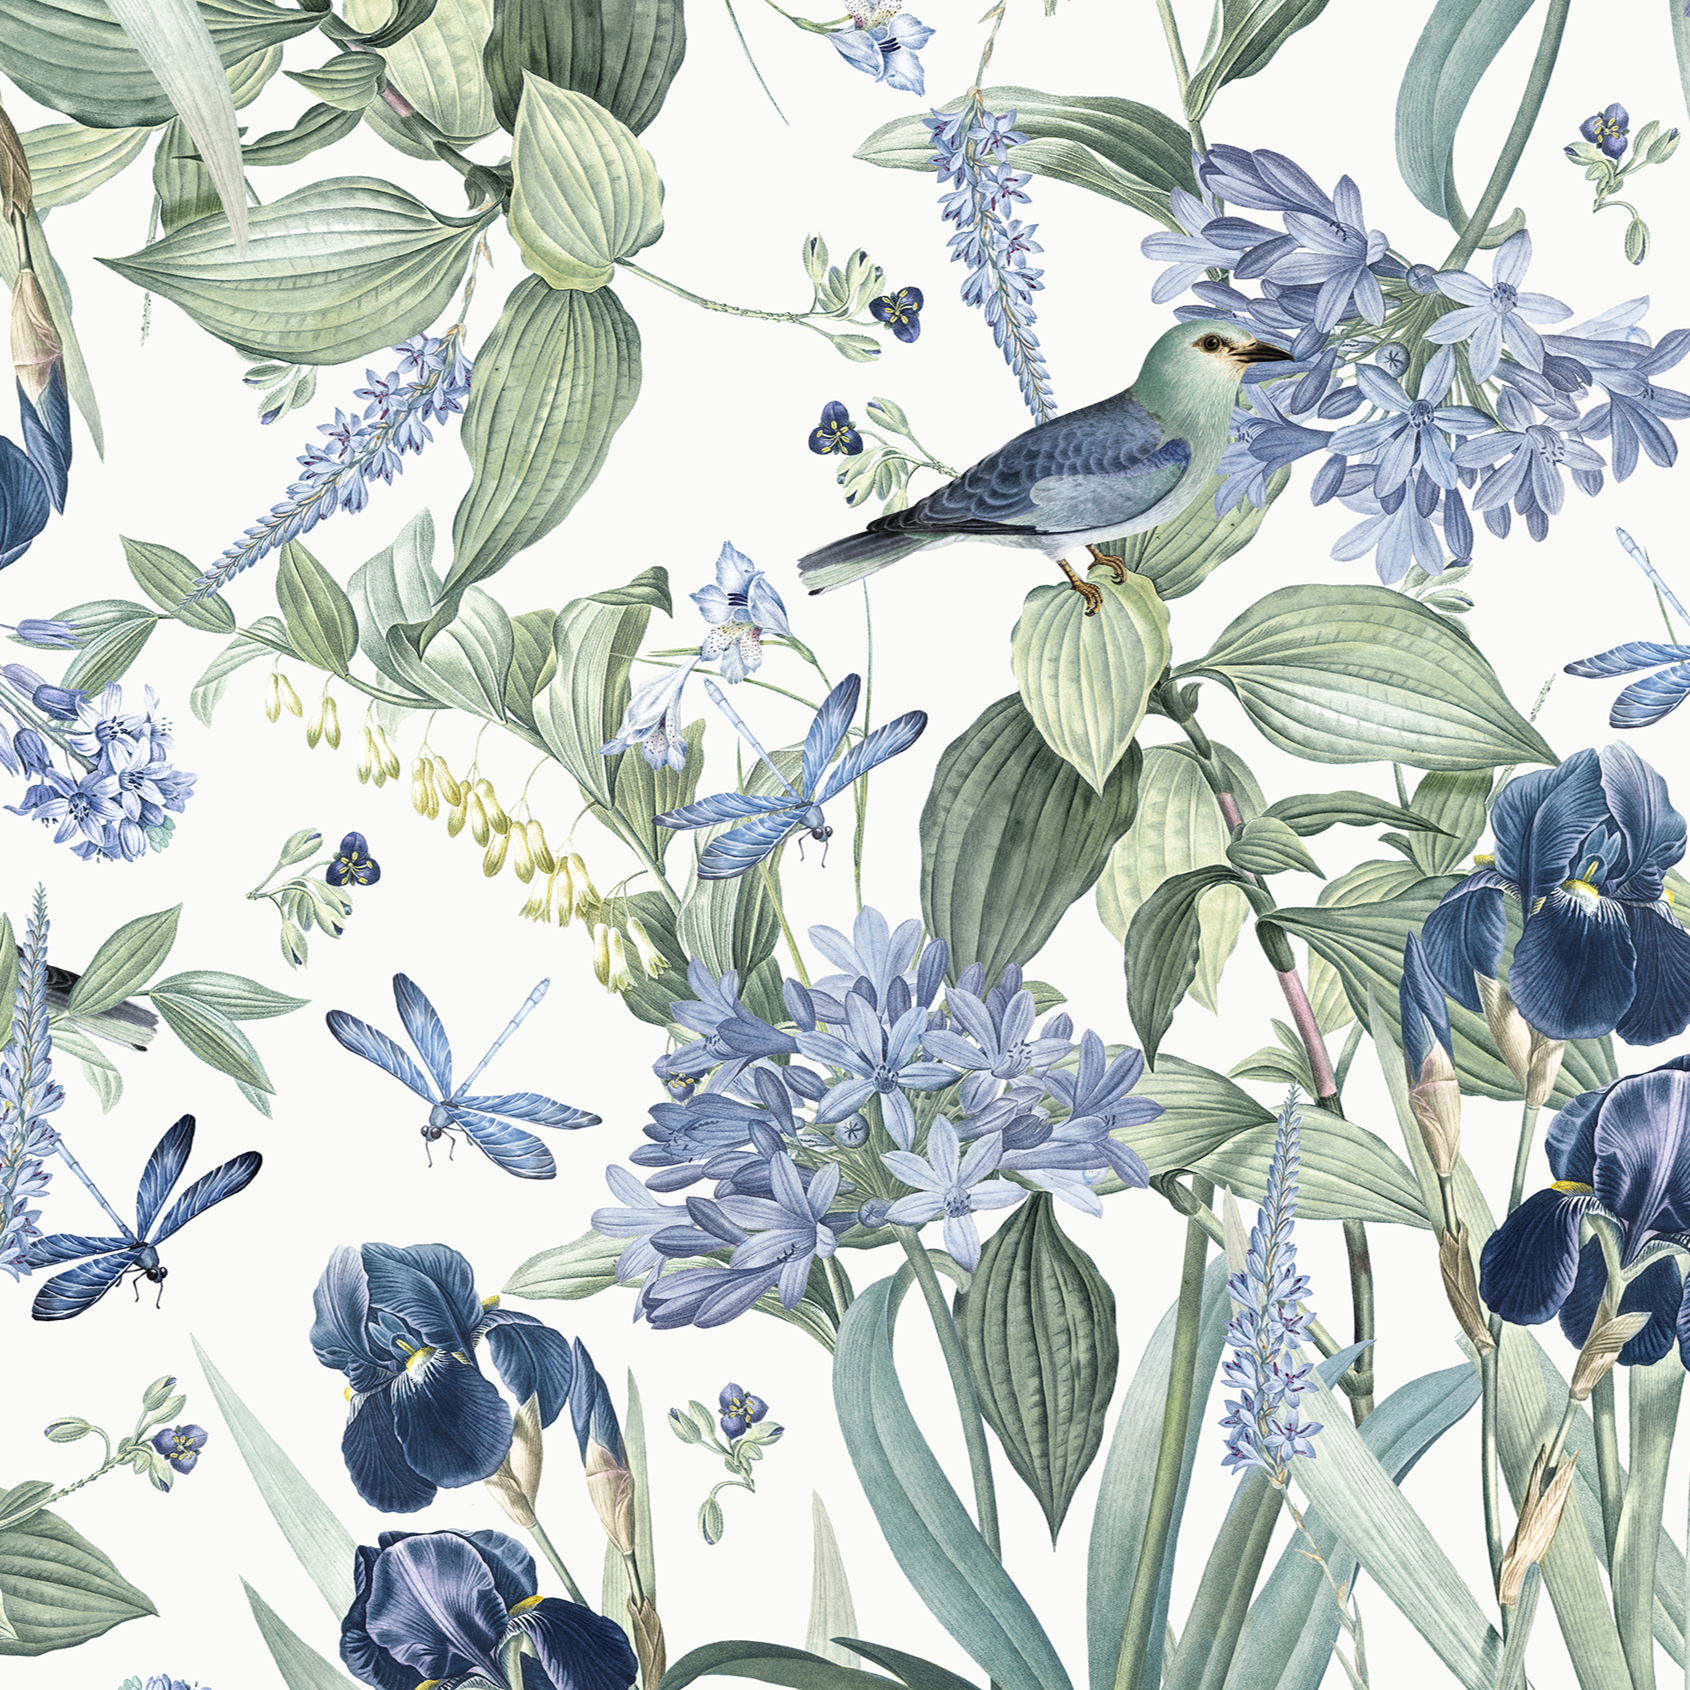 A detailed illustration of the Mint Floral Wallpaper showcasing a serene botanical pattern with blue flowers, green foliage, and subtle mint accents. The design features elegant birds and delicate dragonflies amongst lush floral arrangements, rendered in a soft, watercolor style.